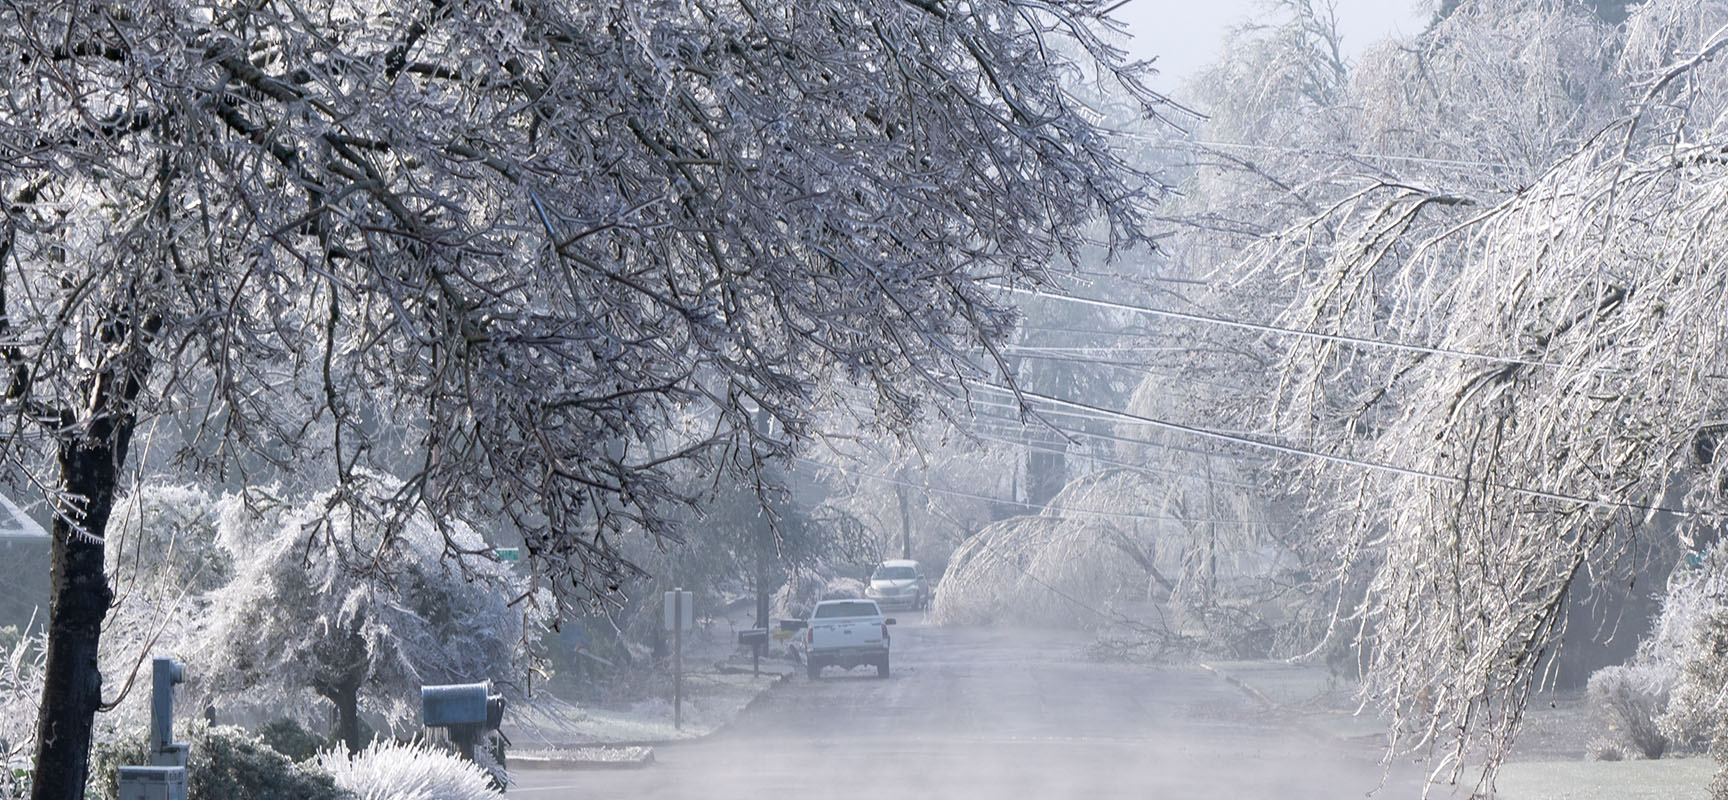 Frozen trees around a street with a car visible